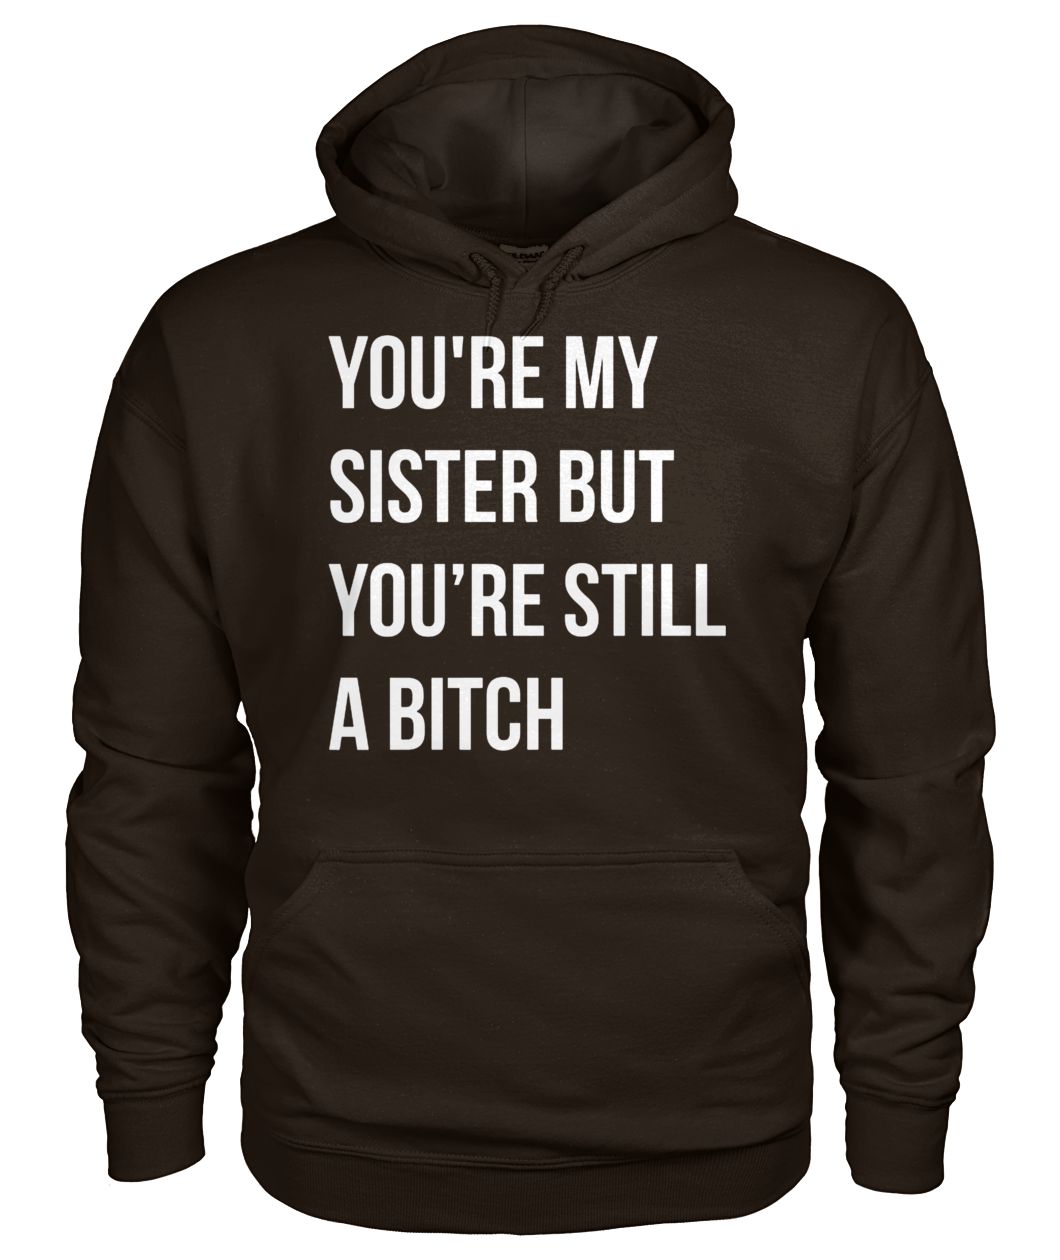 You're my sister but you're still a bitch gildan hoodie